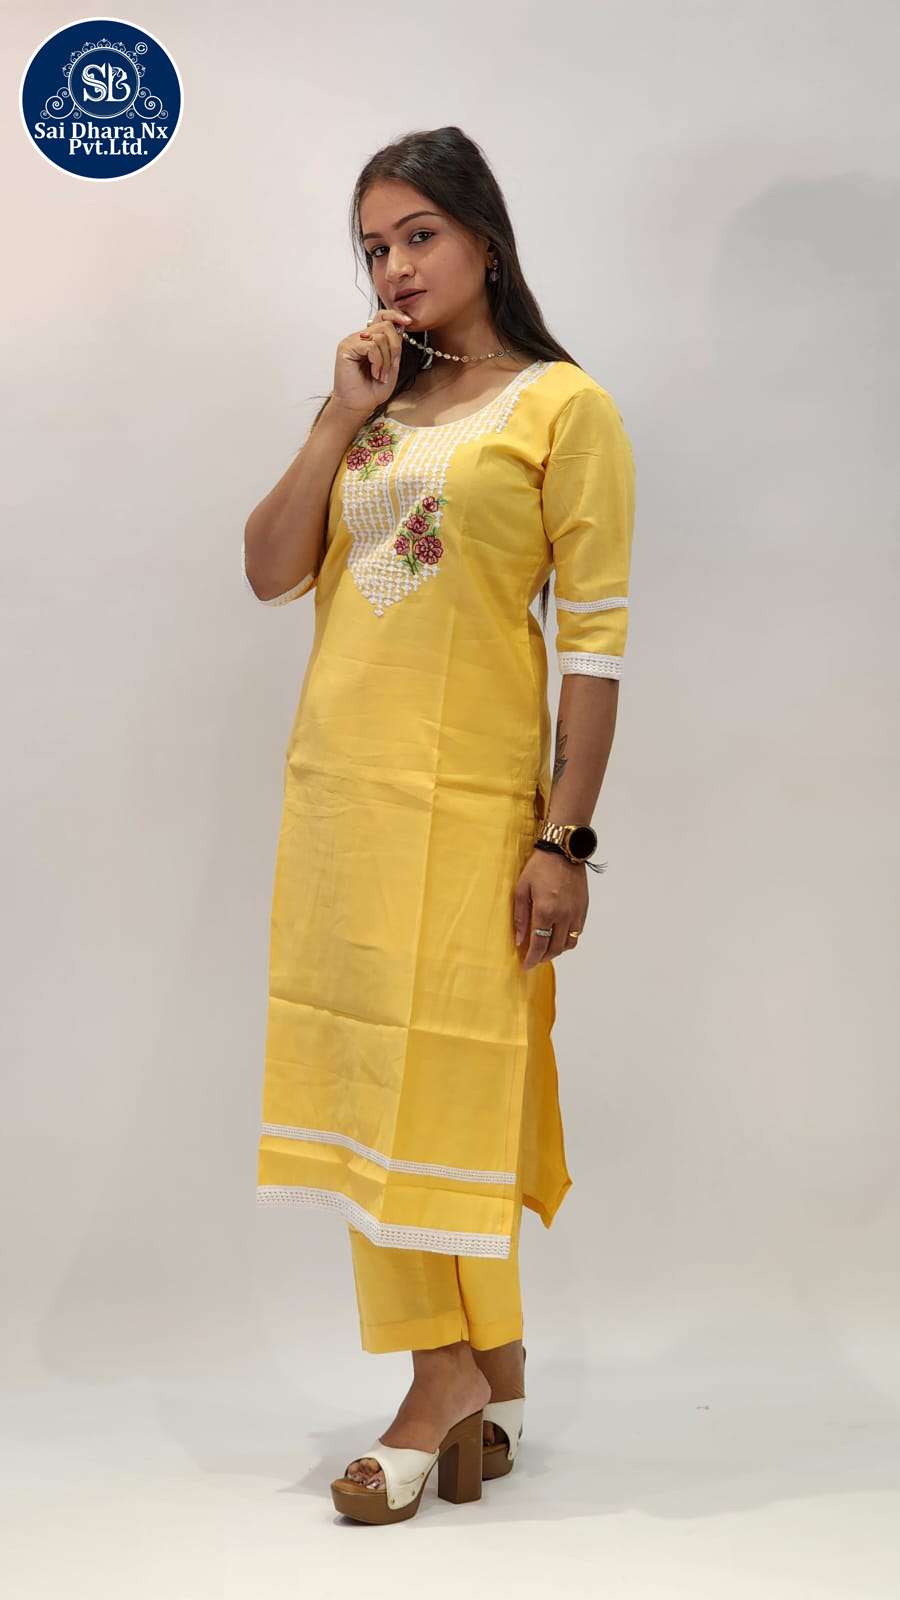 SAIDHARANX PRESENTS PURE MUSLIN FABRIC WITH EMBROIDERY WORK YELLOW 2 PIECE COMBO WHOLESALE SHOP IN SURAT - SaiDharaNx